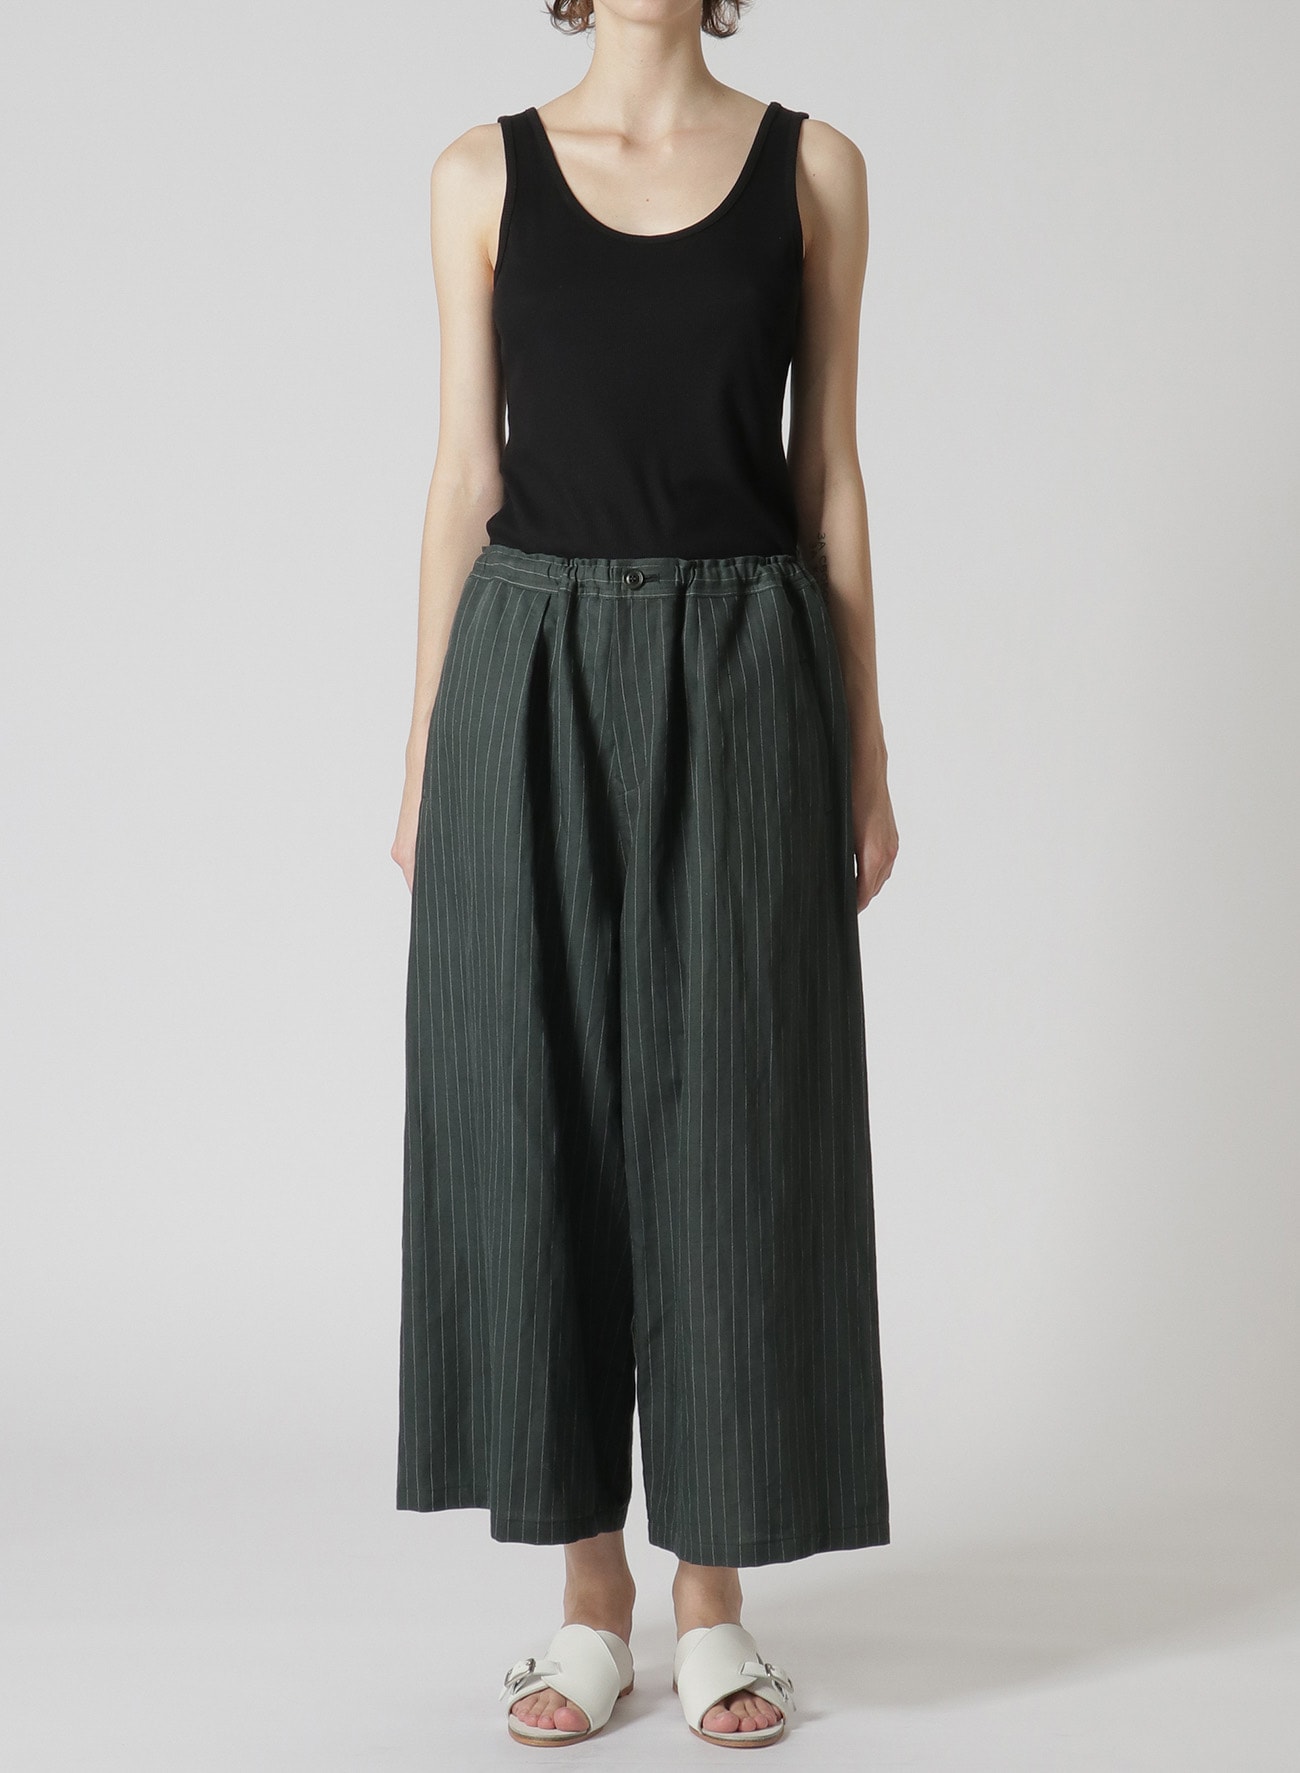 LINEN/COTTON PIN-STRIPED UNEVENLY DYED WIDE LEG PLEATED PANTS